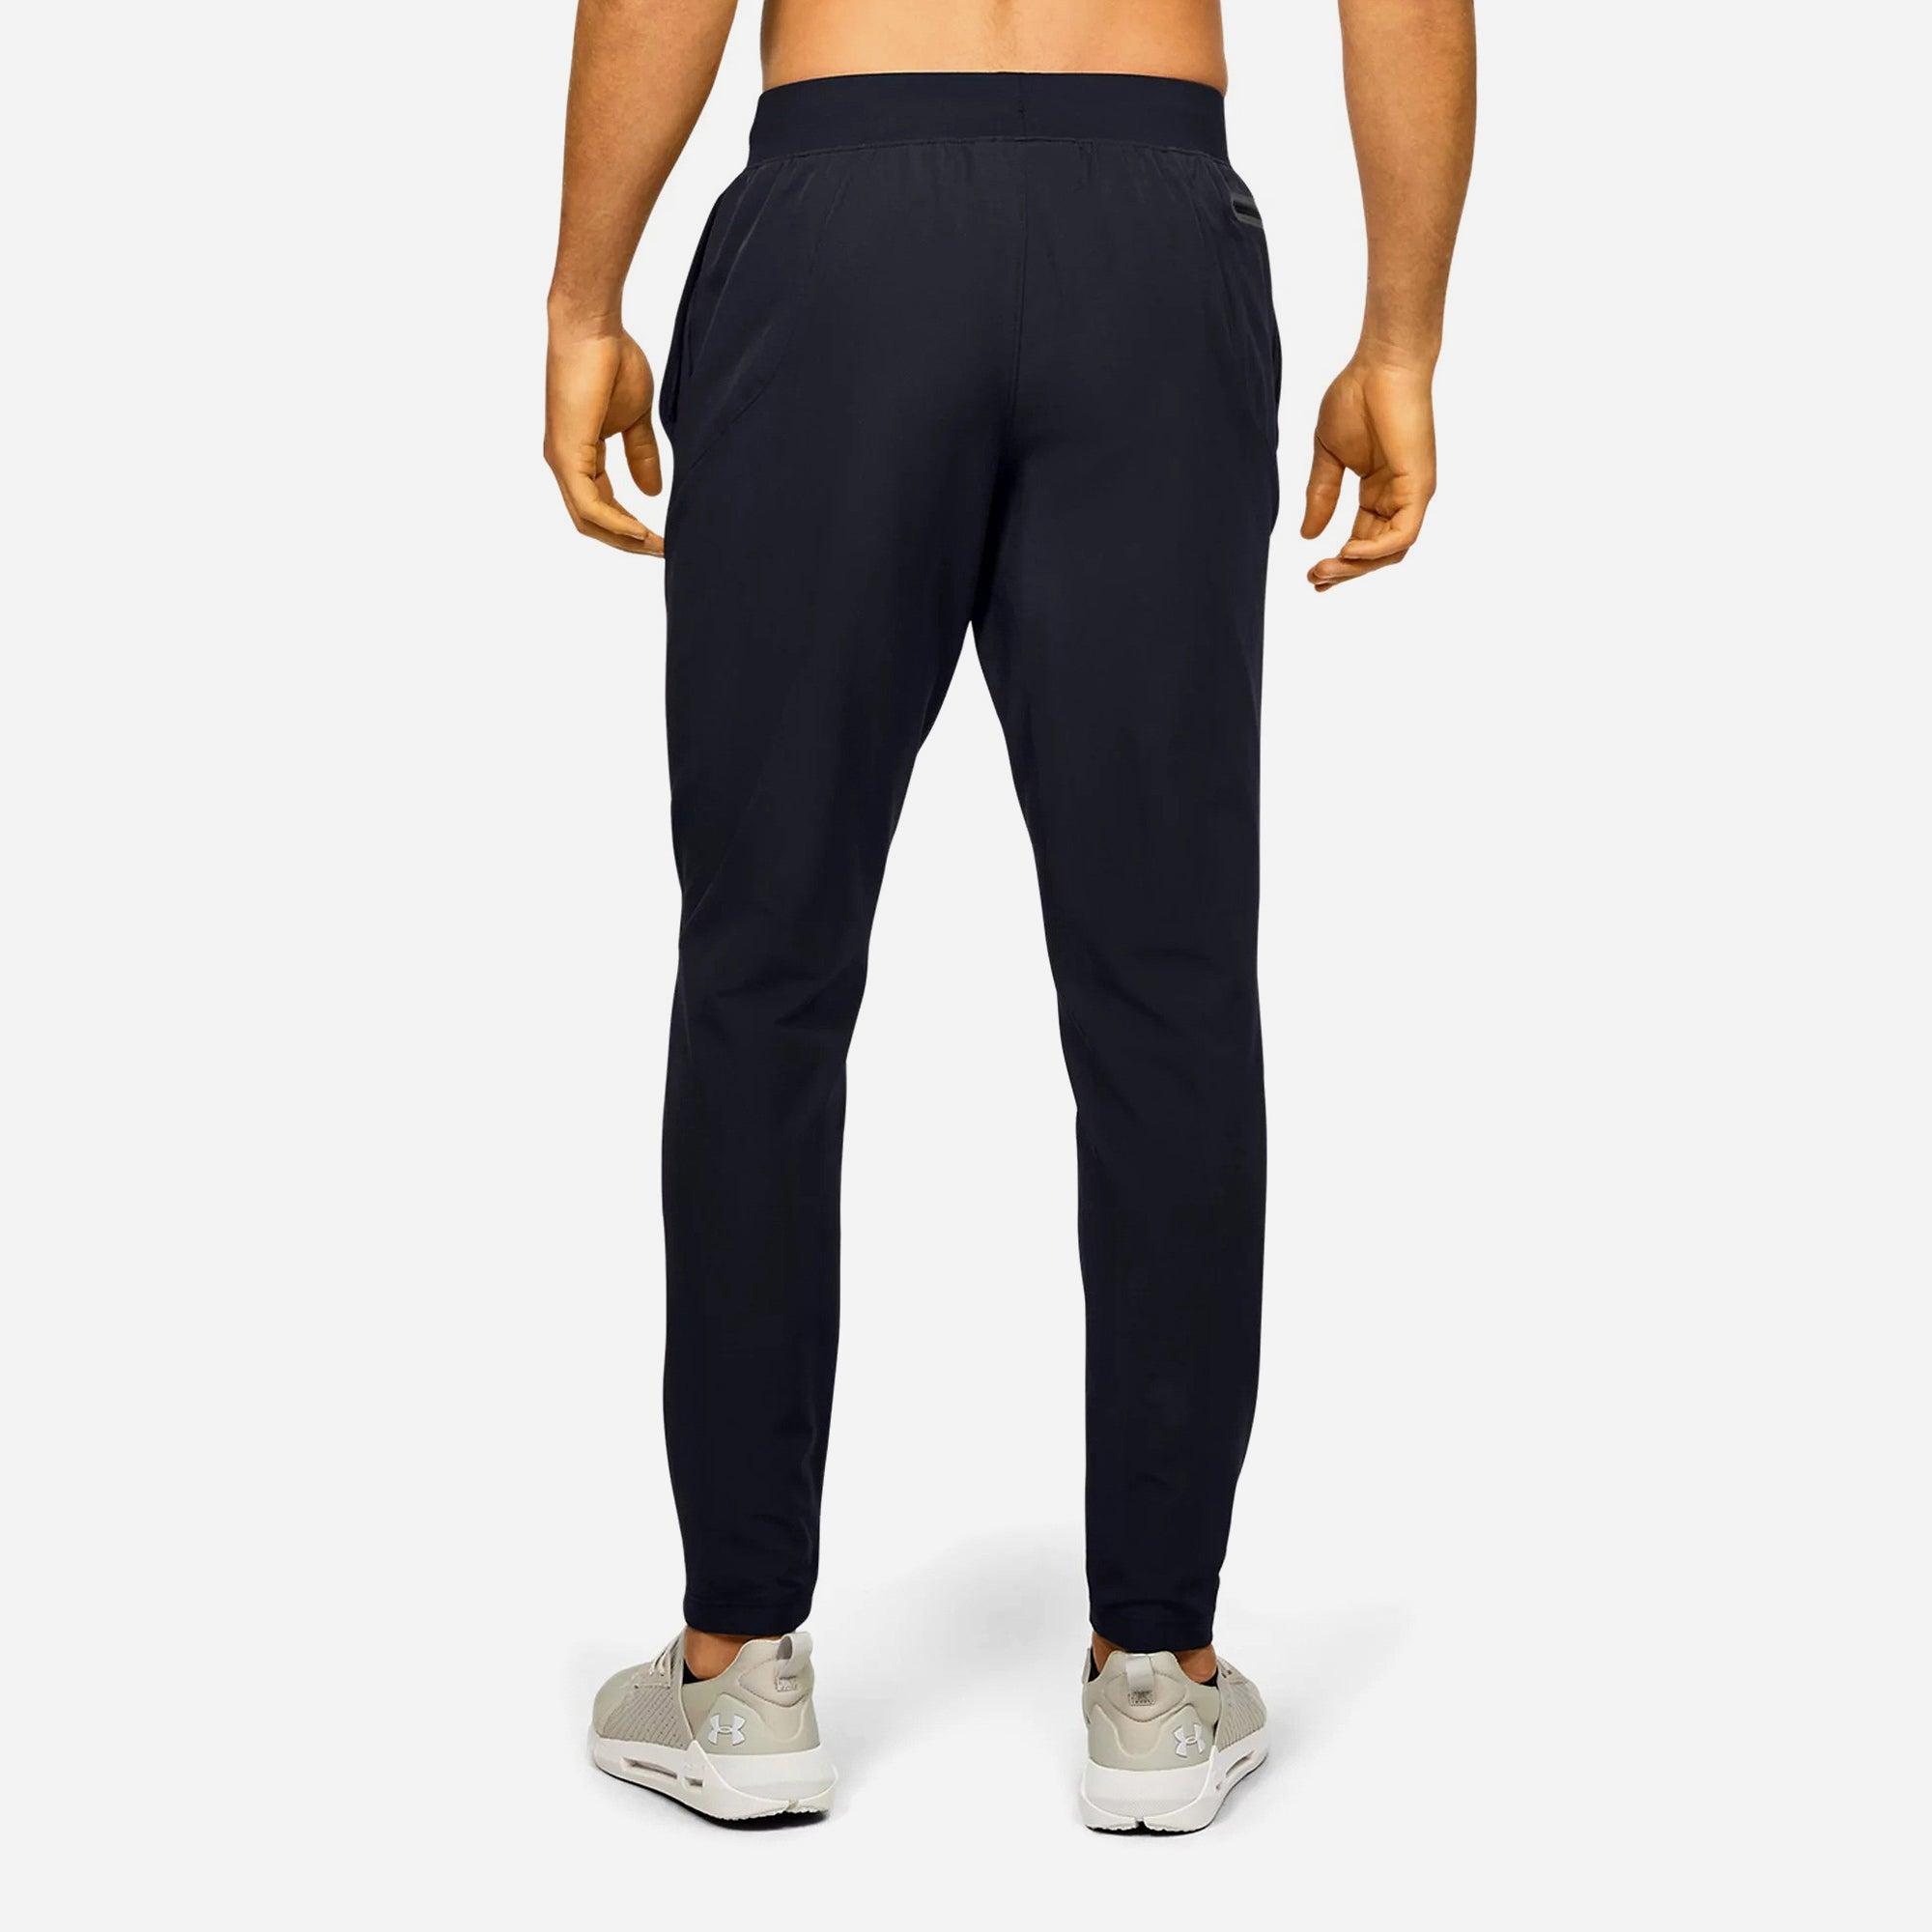 Quần dài thể thao nam Under Armour UNSTOPPABLE TAPERED PANTS - 1352028